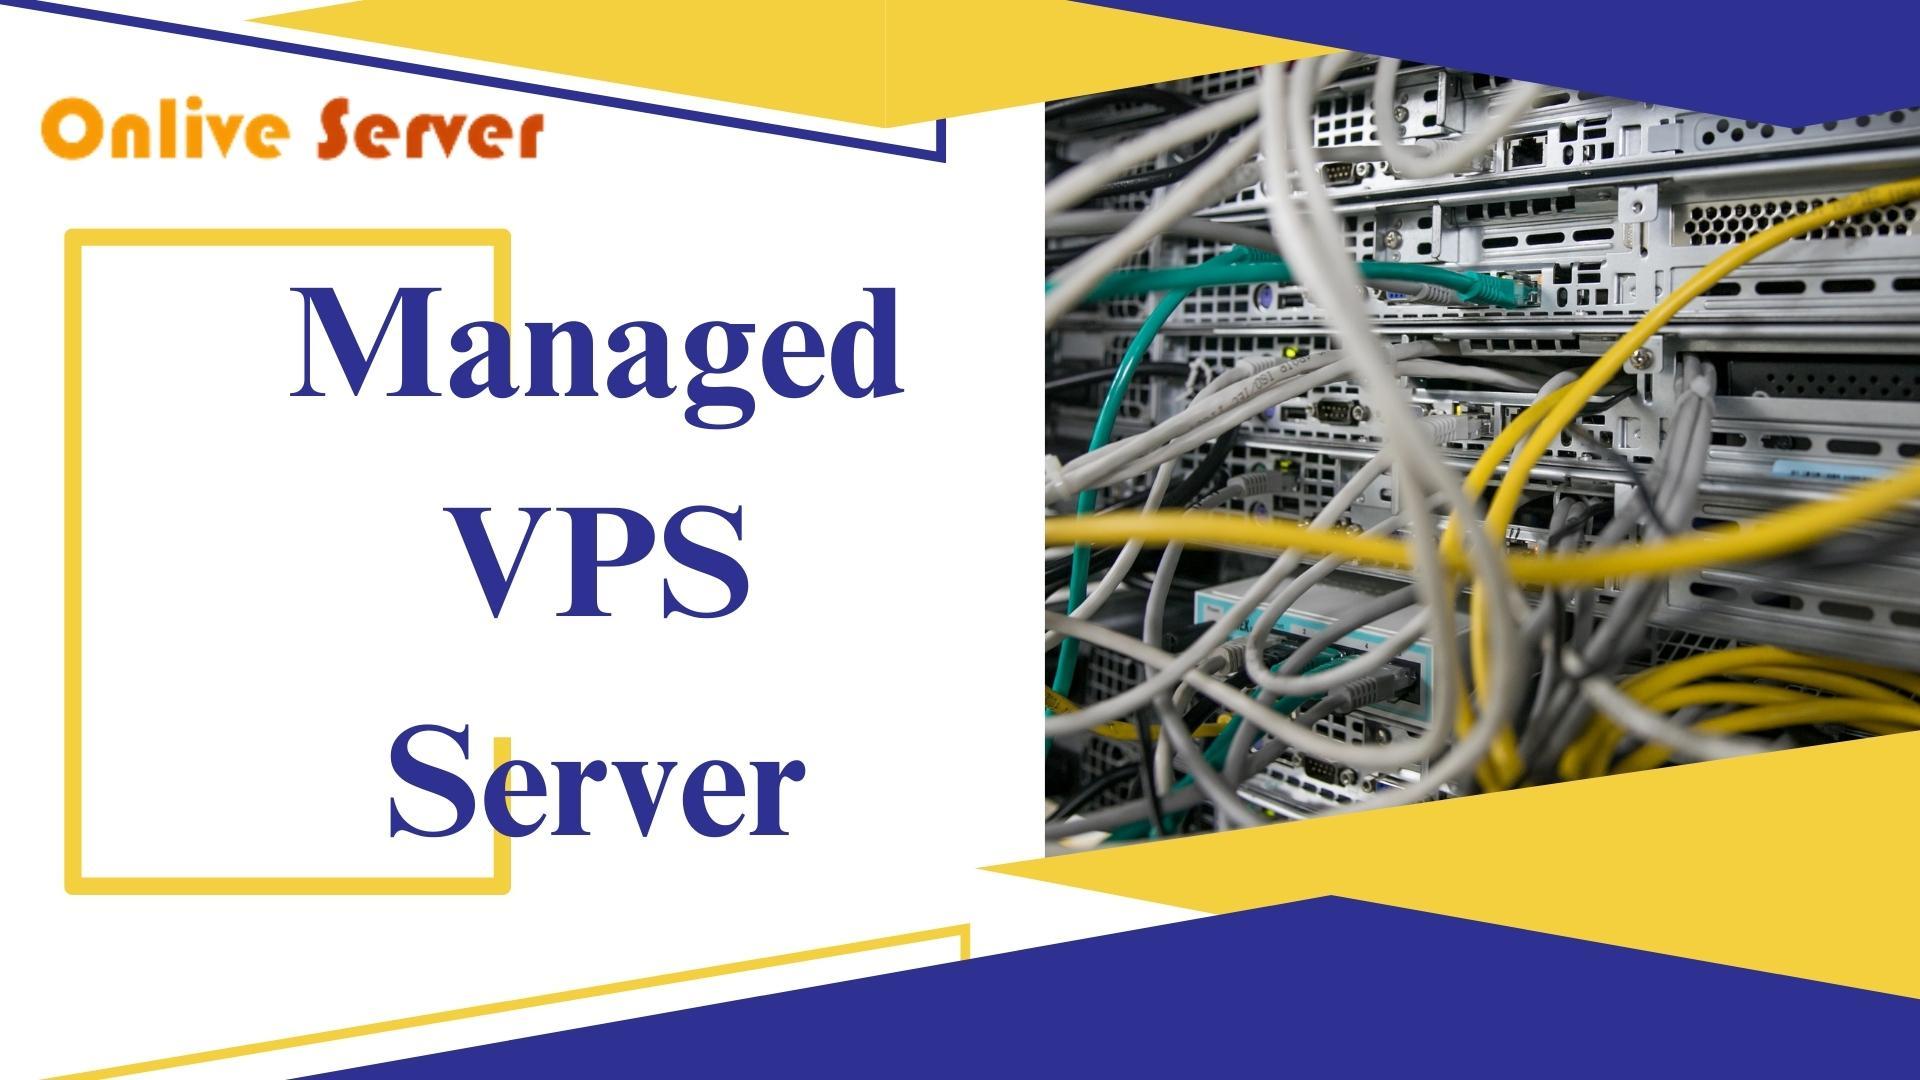 Know about Managed VPS Server Services for your Website